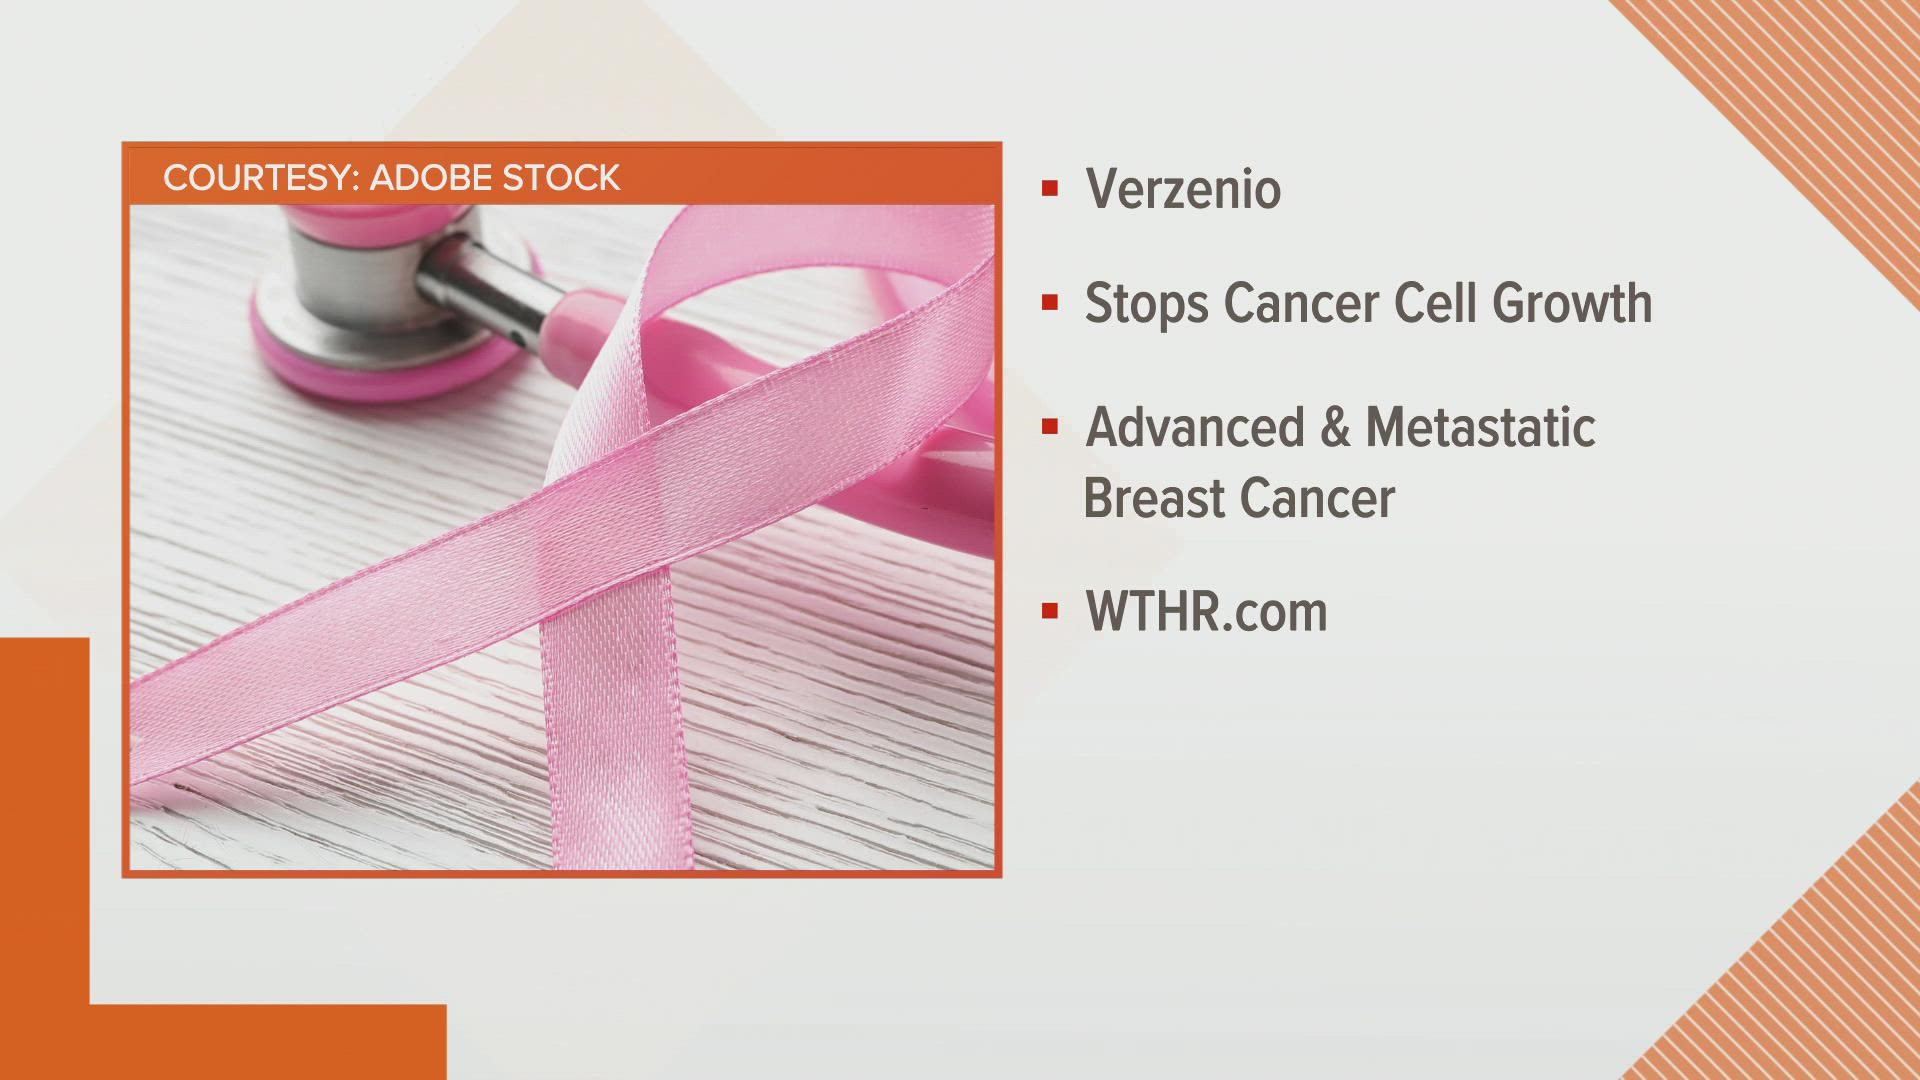 According to Eli Lilly, Verzenio works inside the cell to block CDK4/6 activity and help stop the growth of cancer cells so the cells may eventually die.